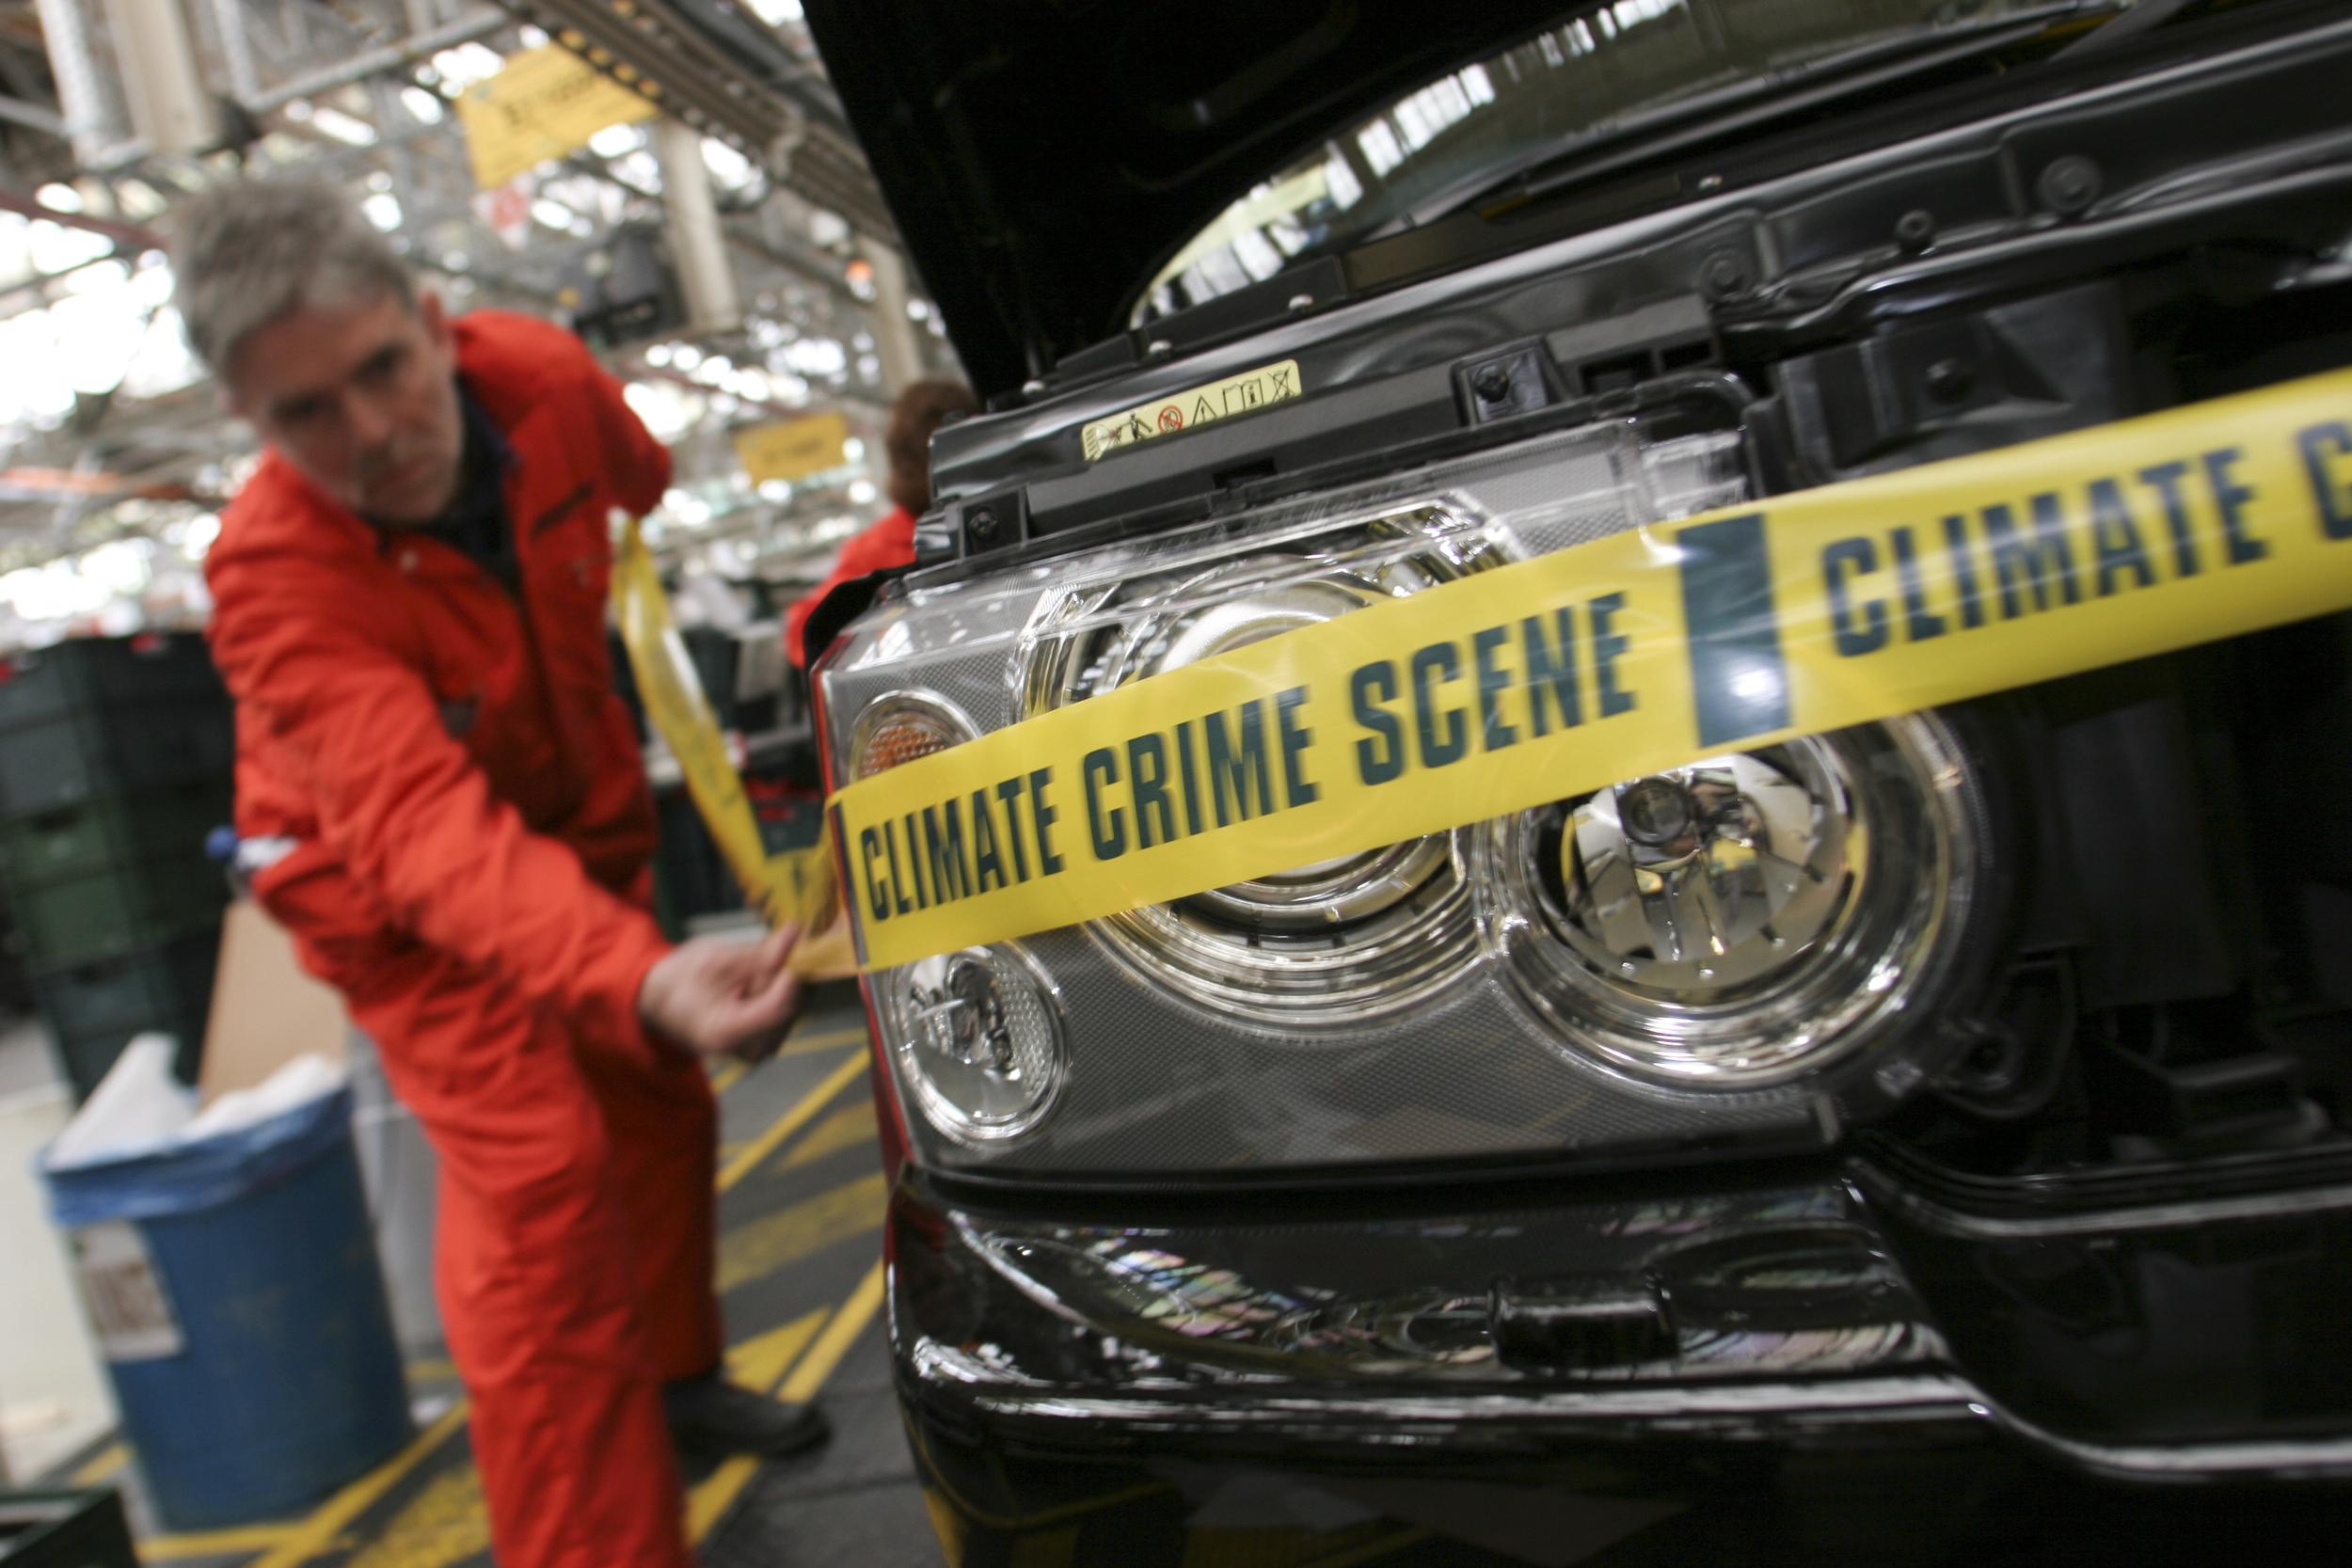 John Sauven, dressed in an orange boiler suit, attaches yellow 'climate crime scene' tape to the front of a car as it moves along a factory assembly line.